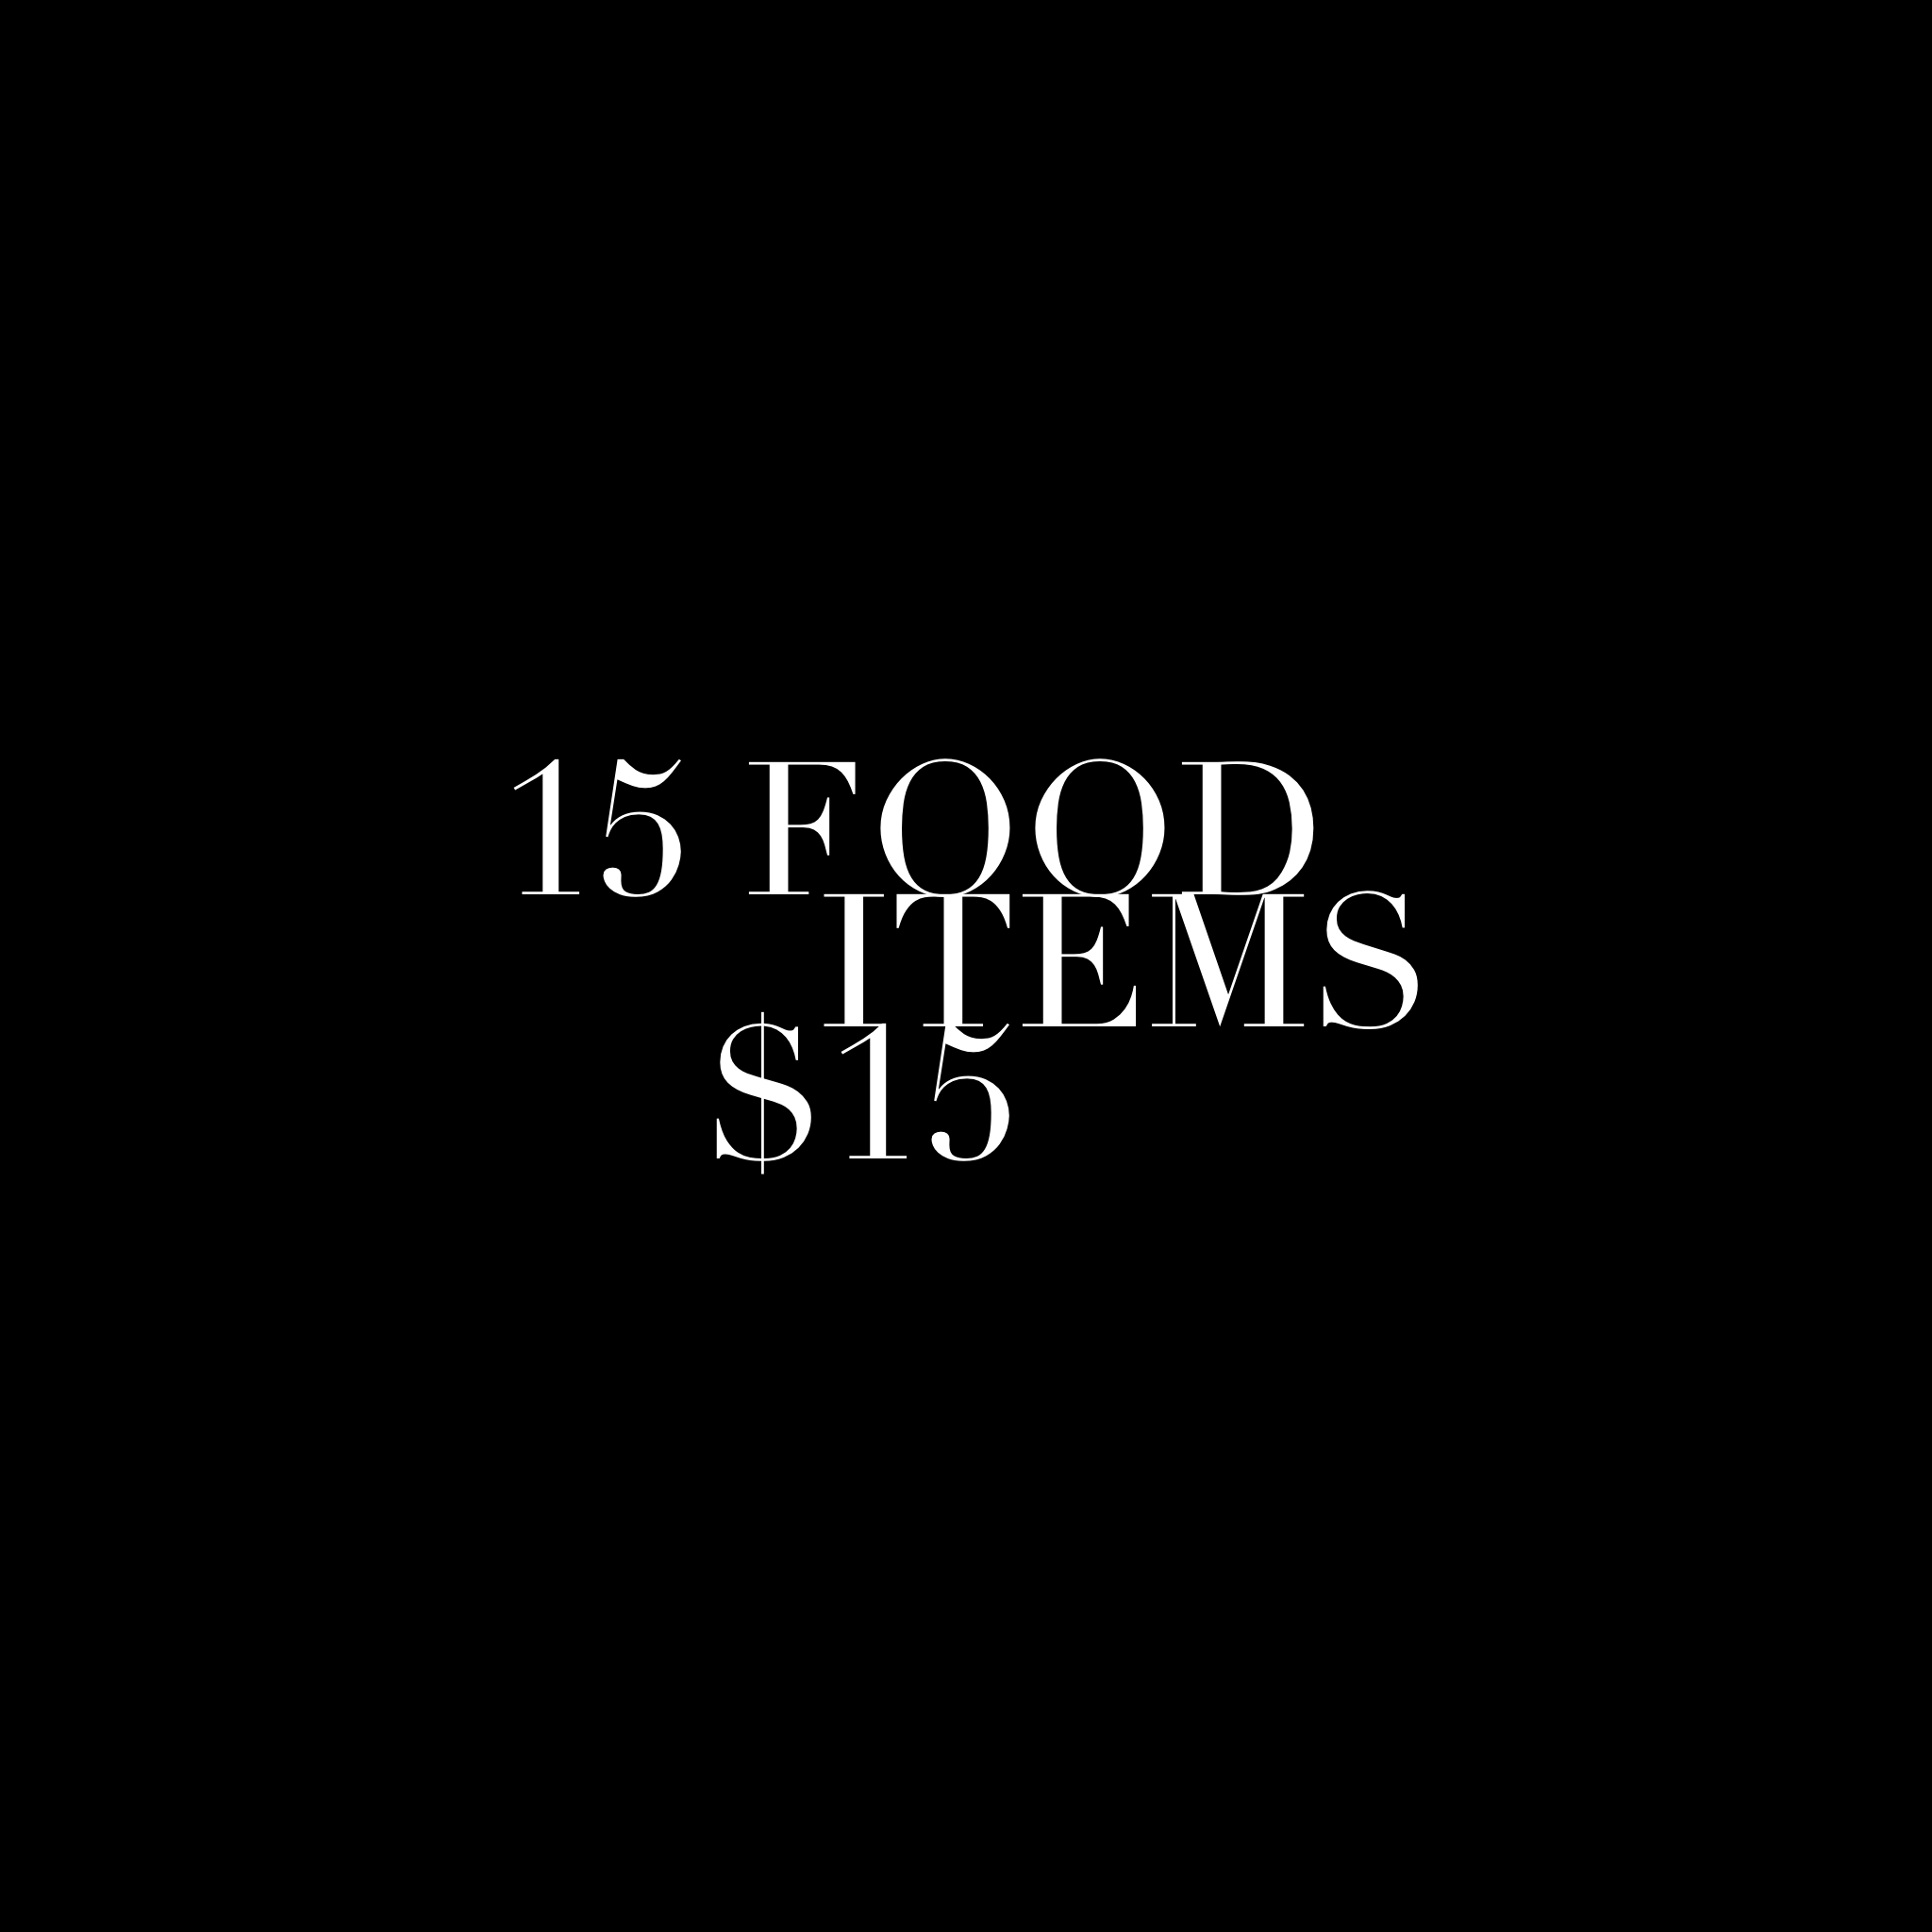 15 food items for $10